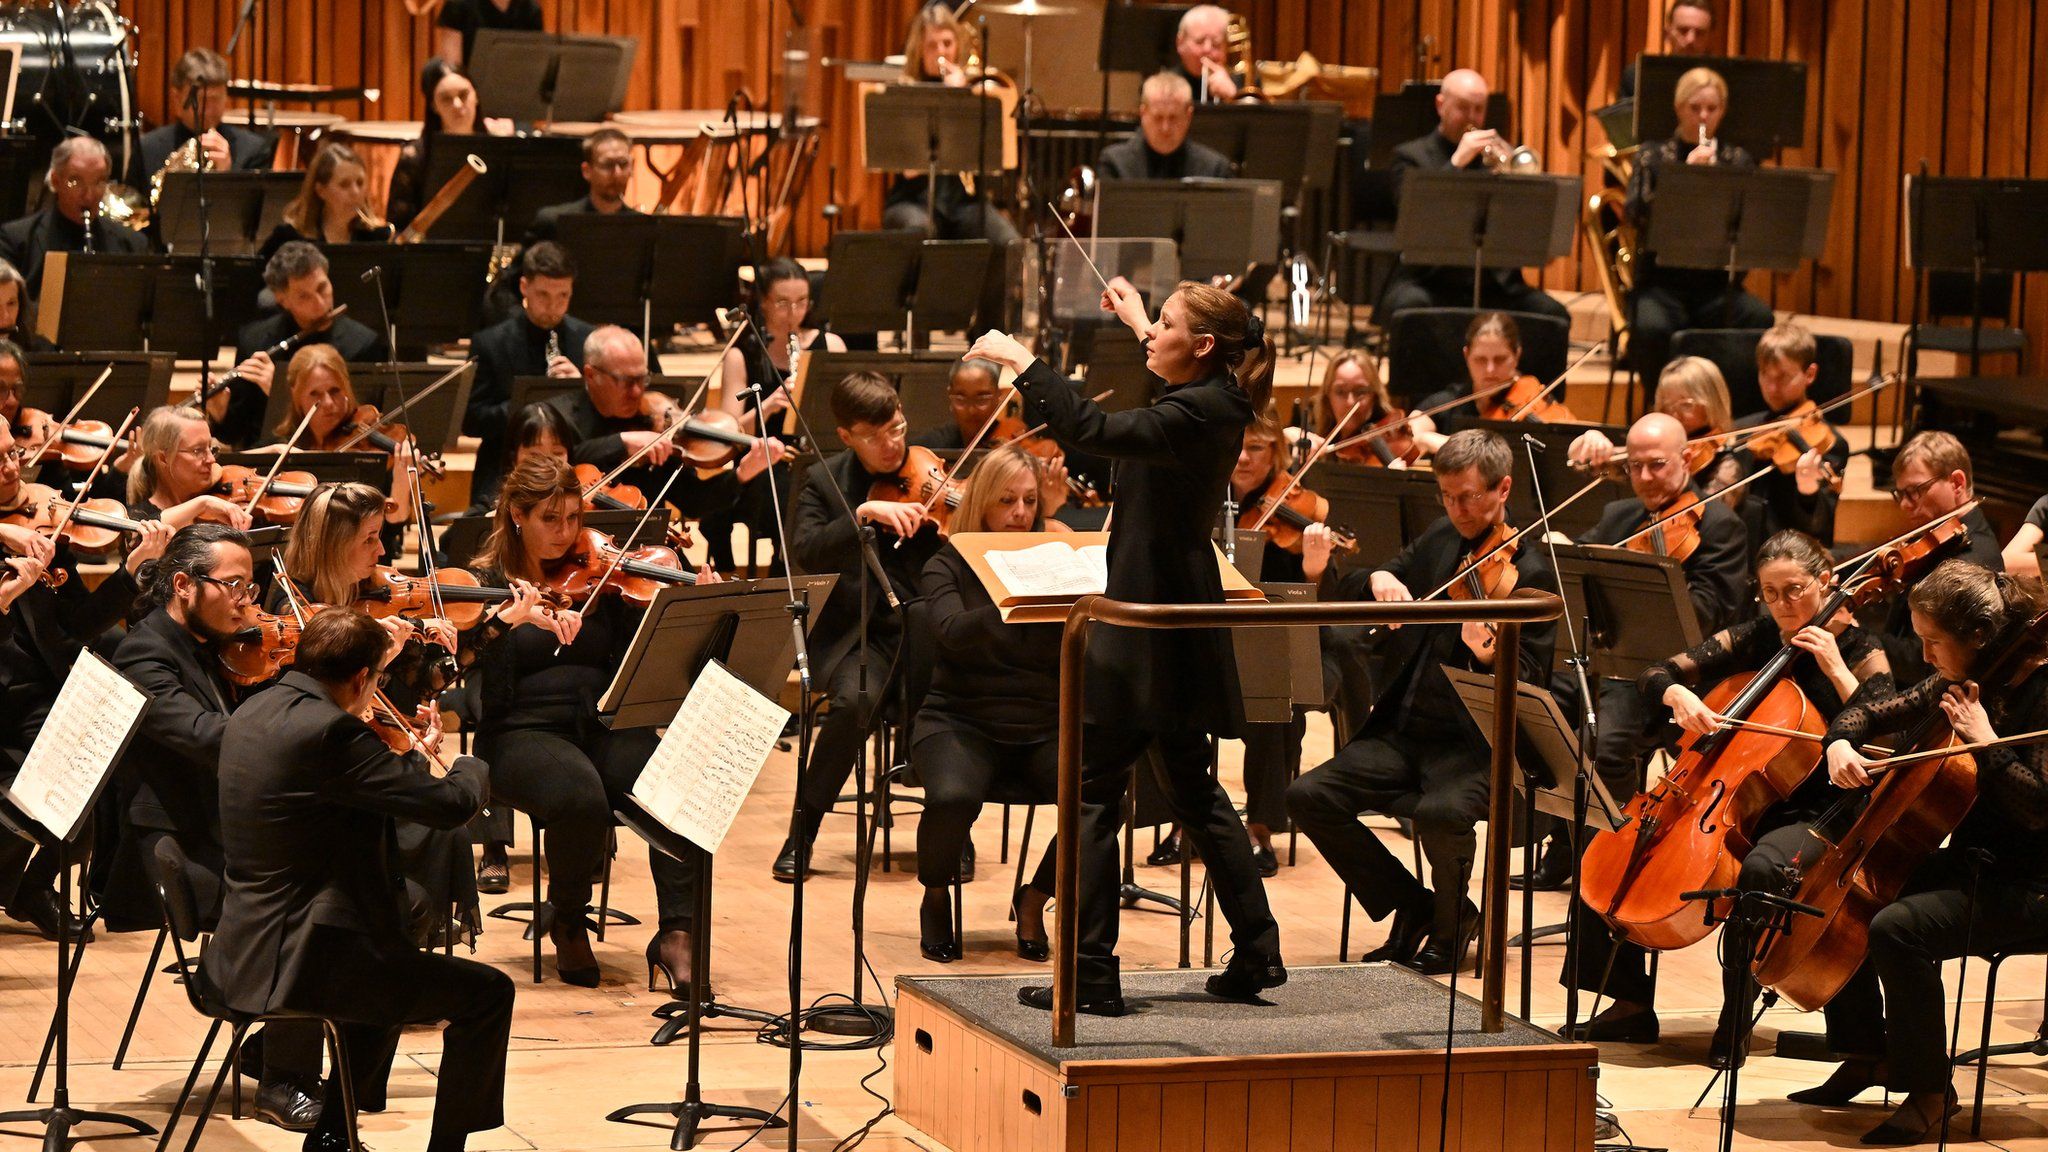 The BBC Symphony Orchestra conducted by Gemma New with Lise de la Salle on piano perform John Adams The Chairman Dances, George Gershwin Piano Concerto in F major, Valerie Coleman Umoja (Anthem of Unity) (UK premiere), Samuel Barber Symphony No 1 in the Barbican Hall on Friday 24 February 2023